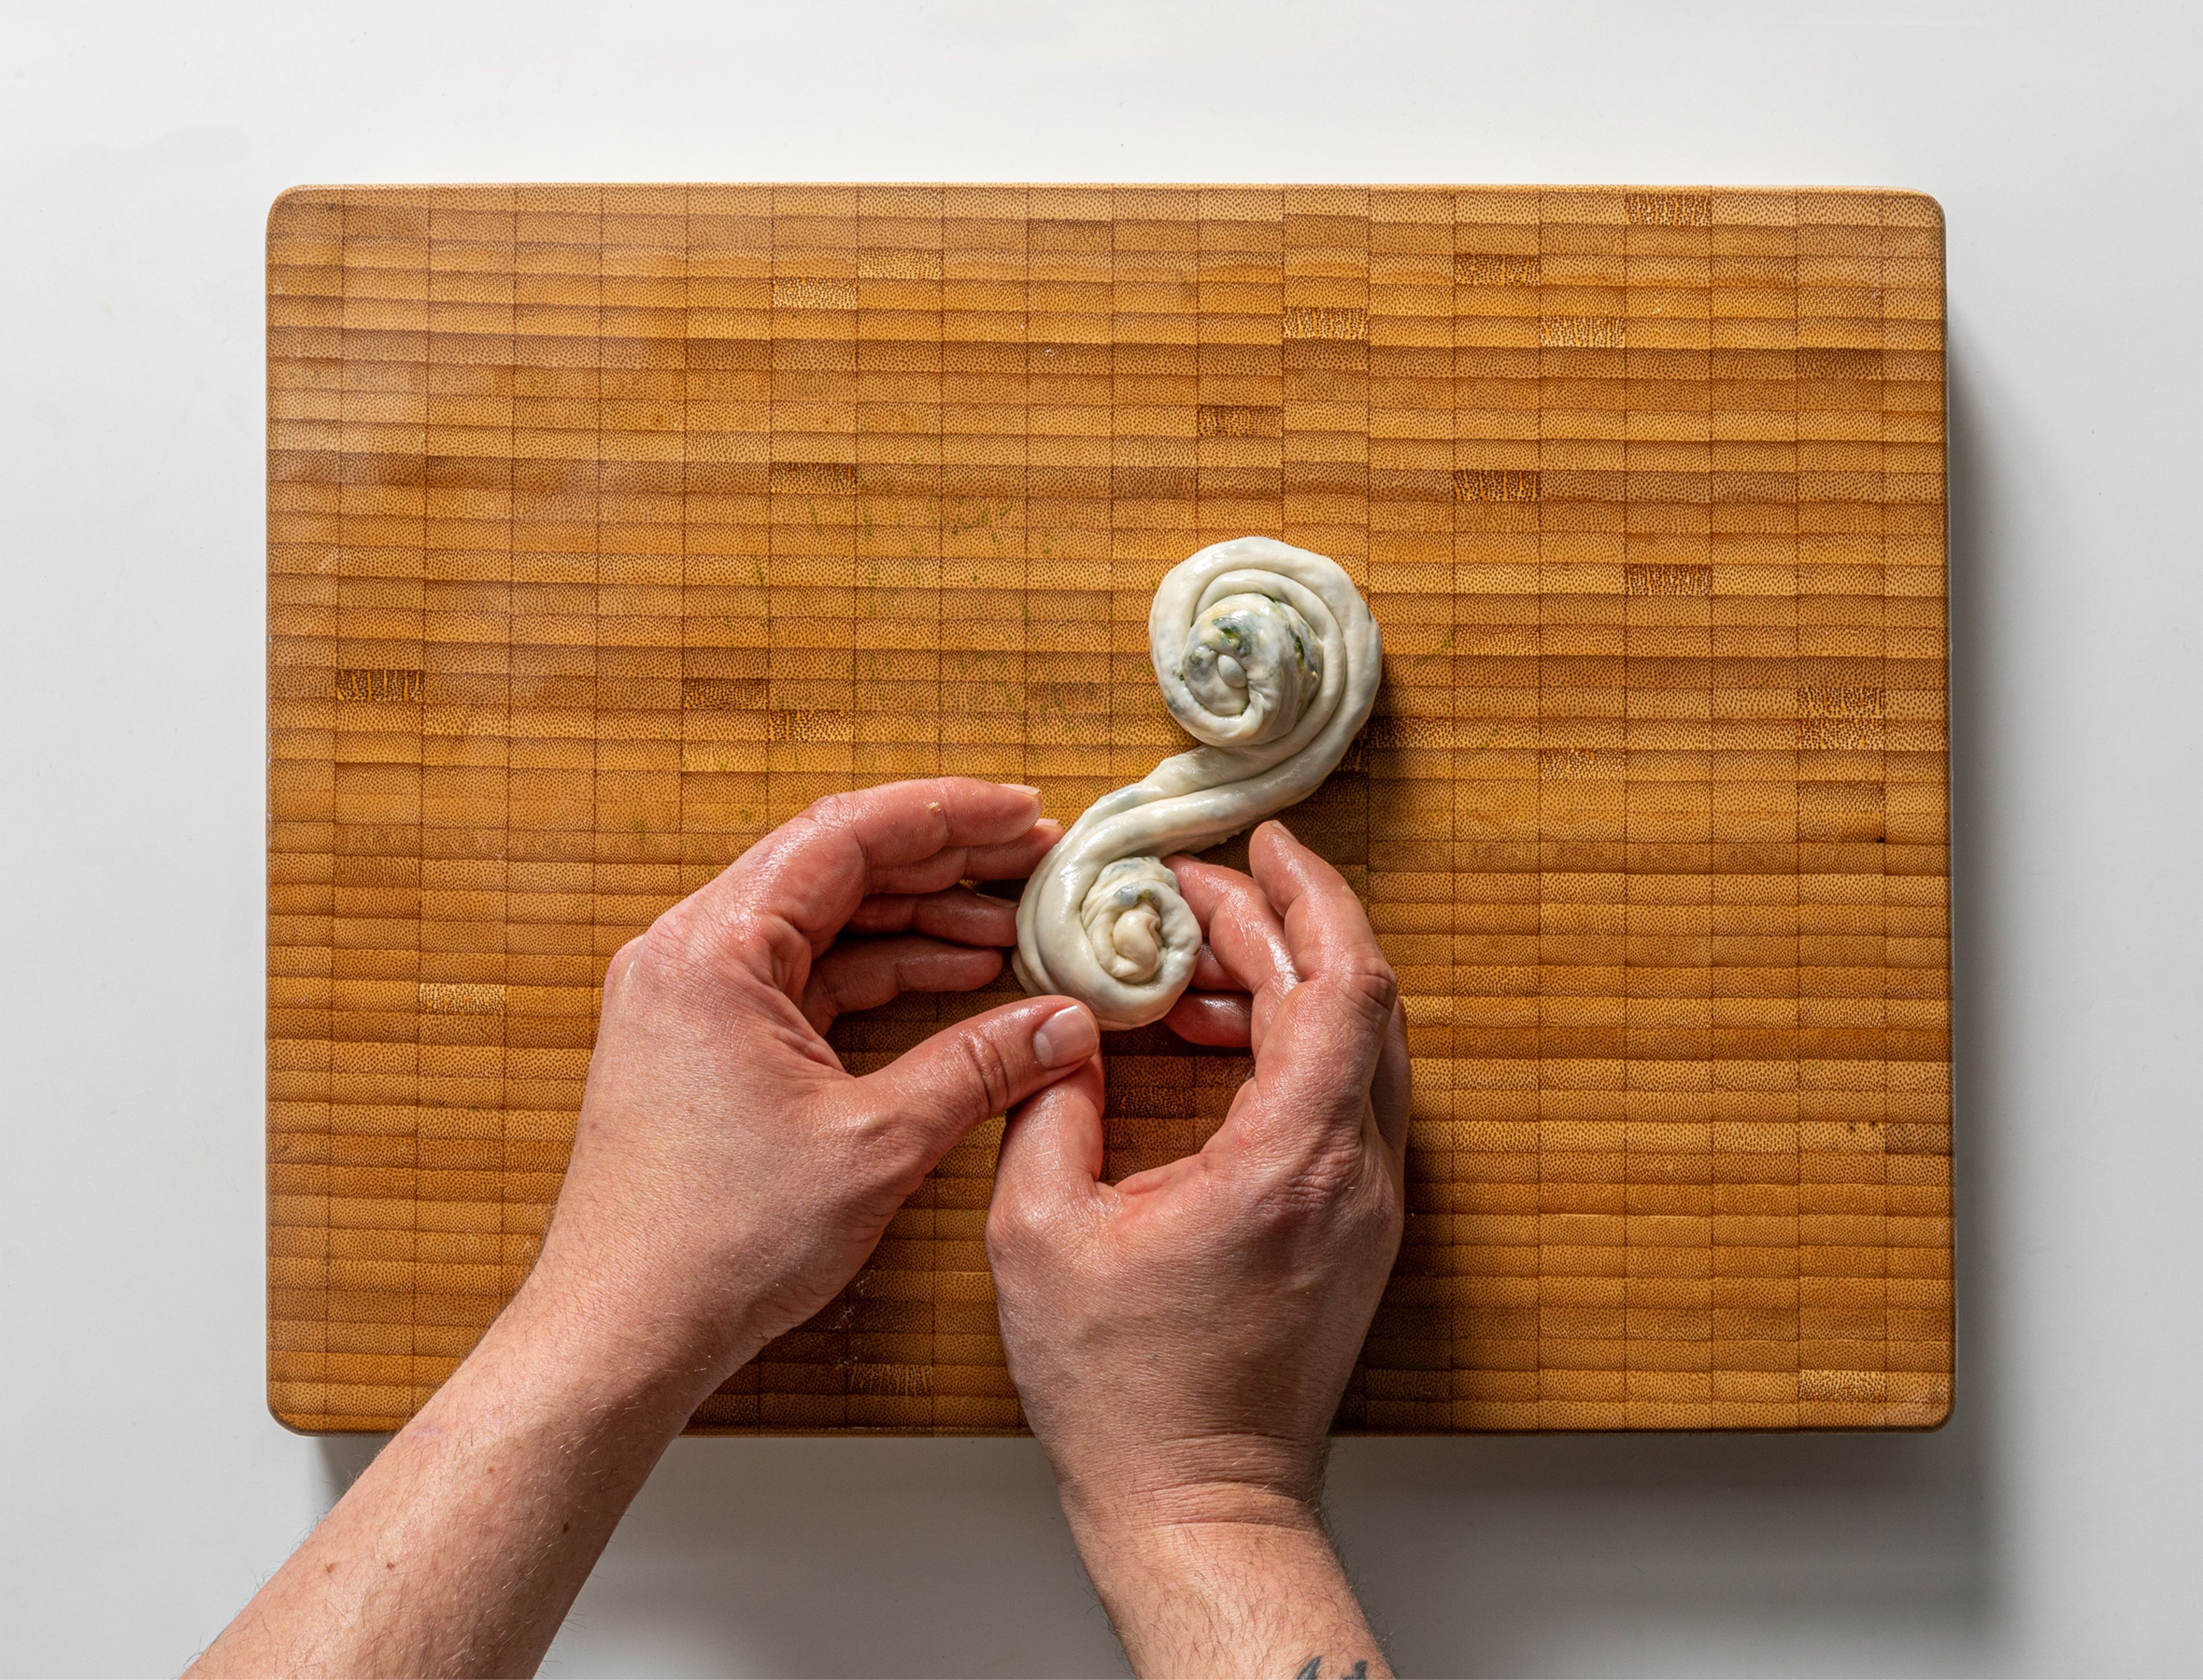 After the dough has rested, grease a large wooden cutting board. Divide the dough into equal pieces. Roll out into a rectangle until very thin using an oiled rolling pin. Spread some of the wild garlic filling on top. Roll up into a long thin snake and stretch both sides out by pulling gently. Roll the log from both sides into a snail and set aside to rest; if you’re making a large batch, brush a thin layer of oil while they rest so they don’t dry out. Repeat with the rest of the ingredients. Flatten each disk with a rolling pin again, until you have pancakes about 7 - 8 in. / 20-cm in diameter.